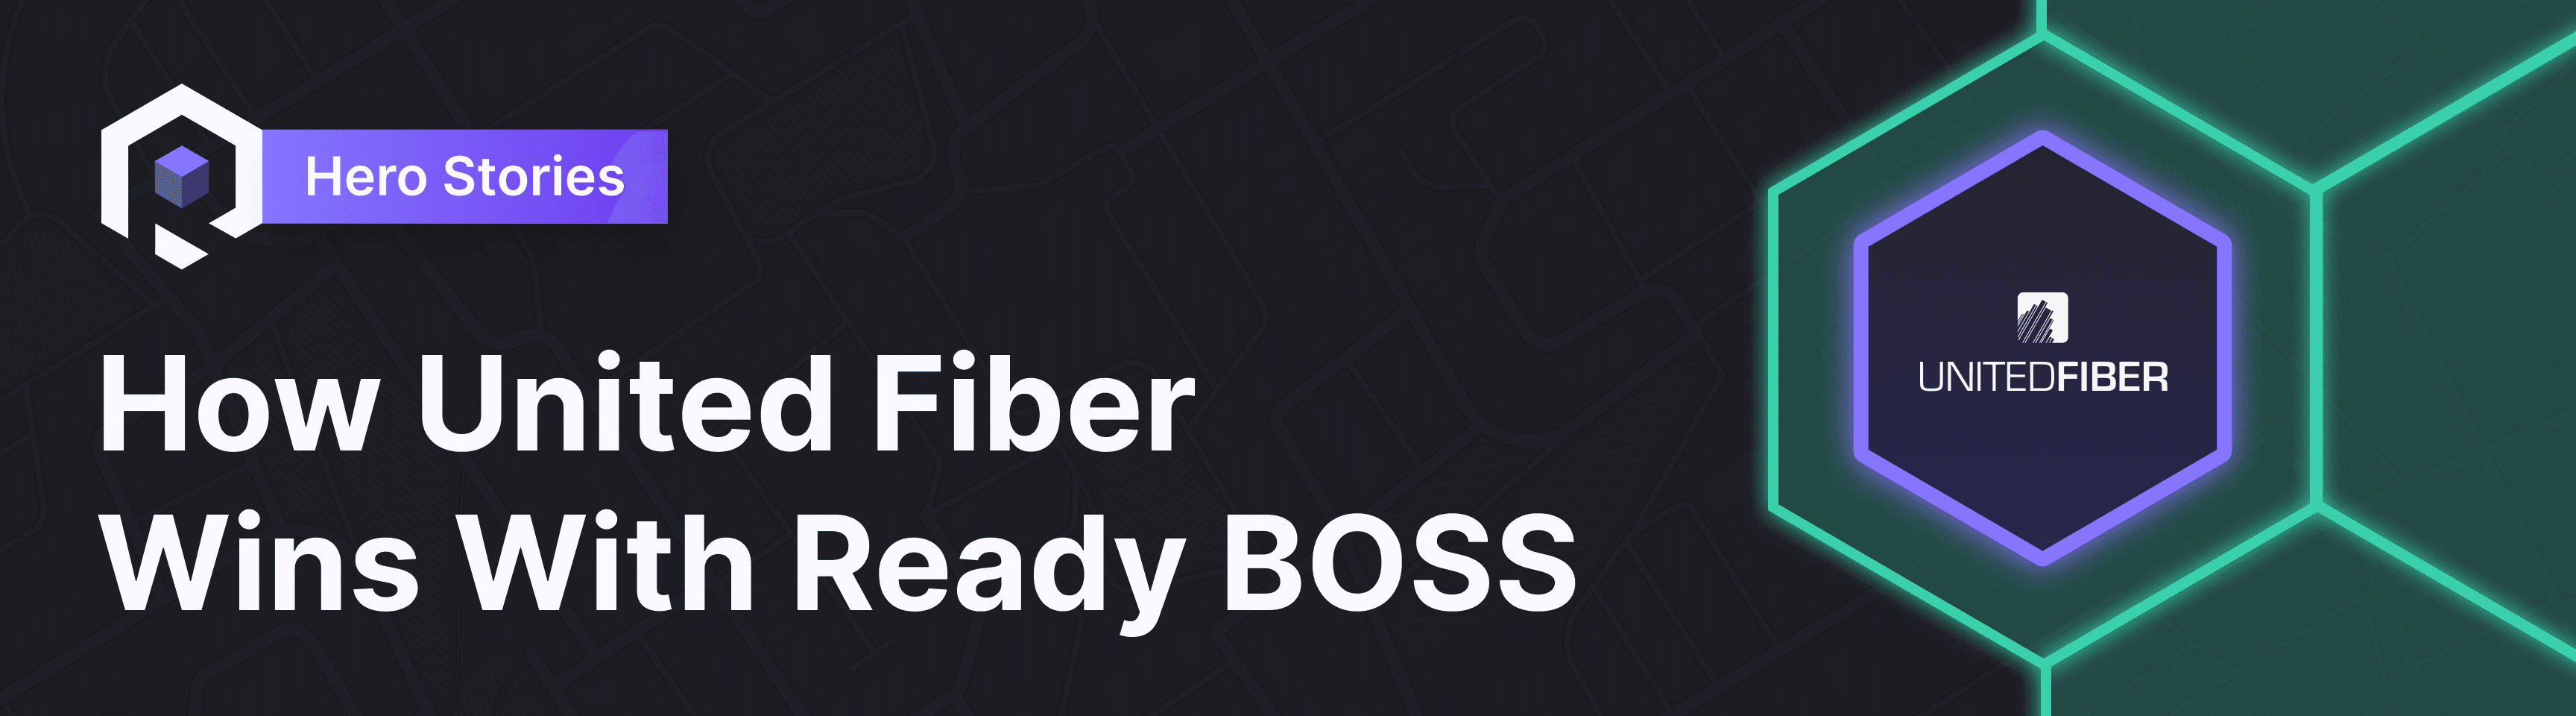 How United Fiber Saved Hundred of Hours Per Year Using Ready BOSS Banner Image